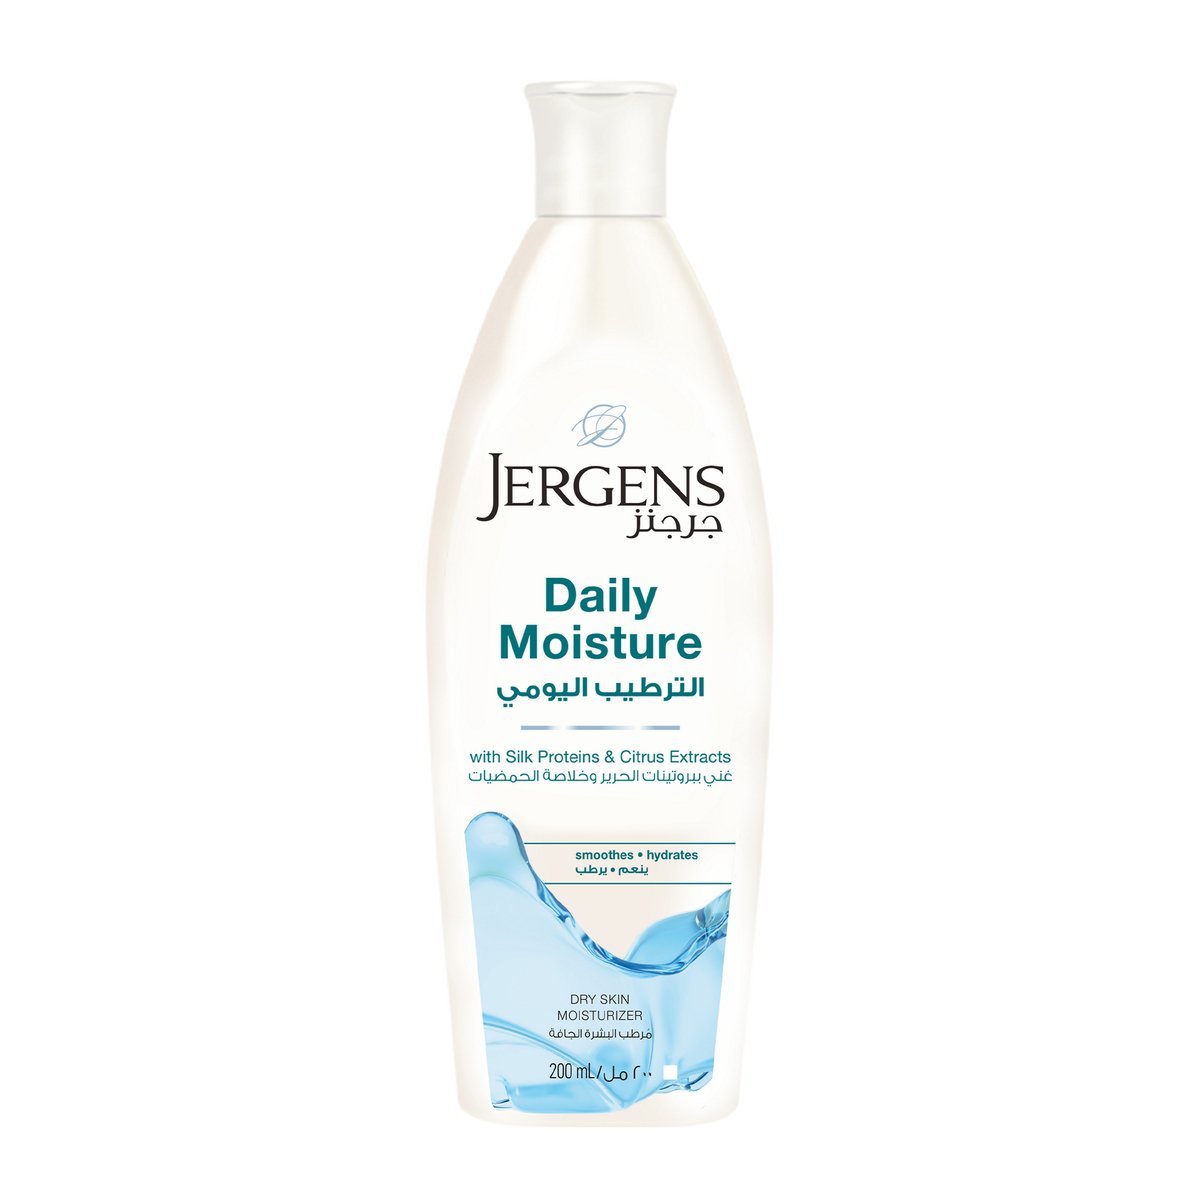 Jergens Body Lotion Daily Moisture, 200 ml